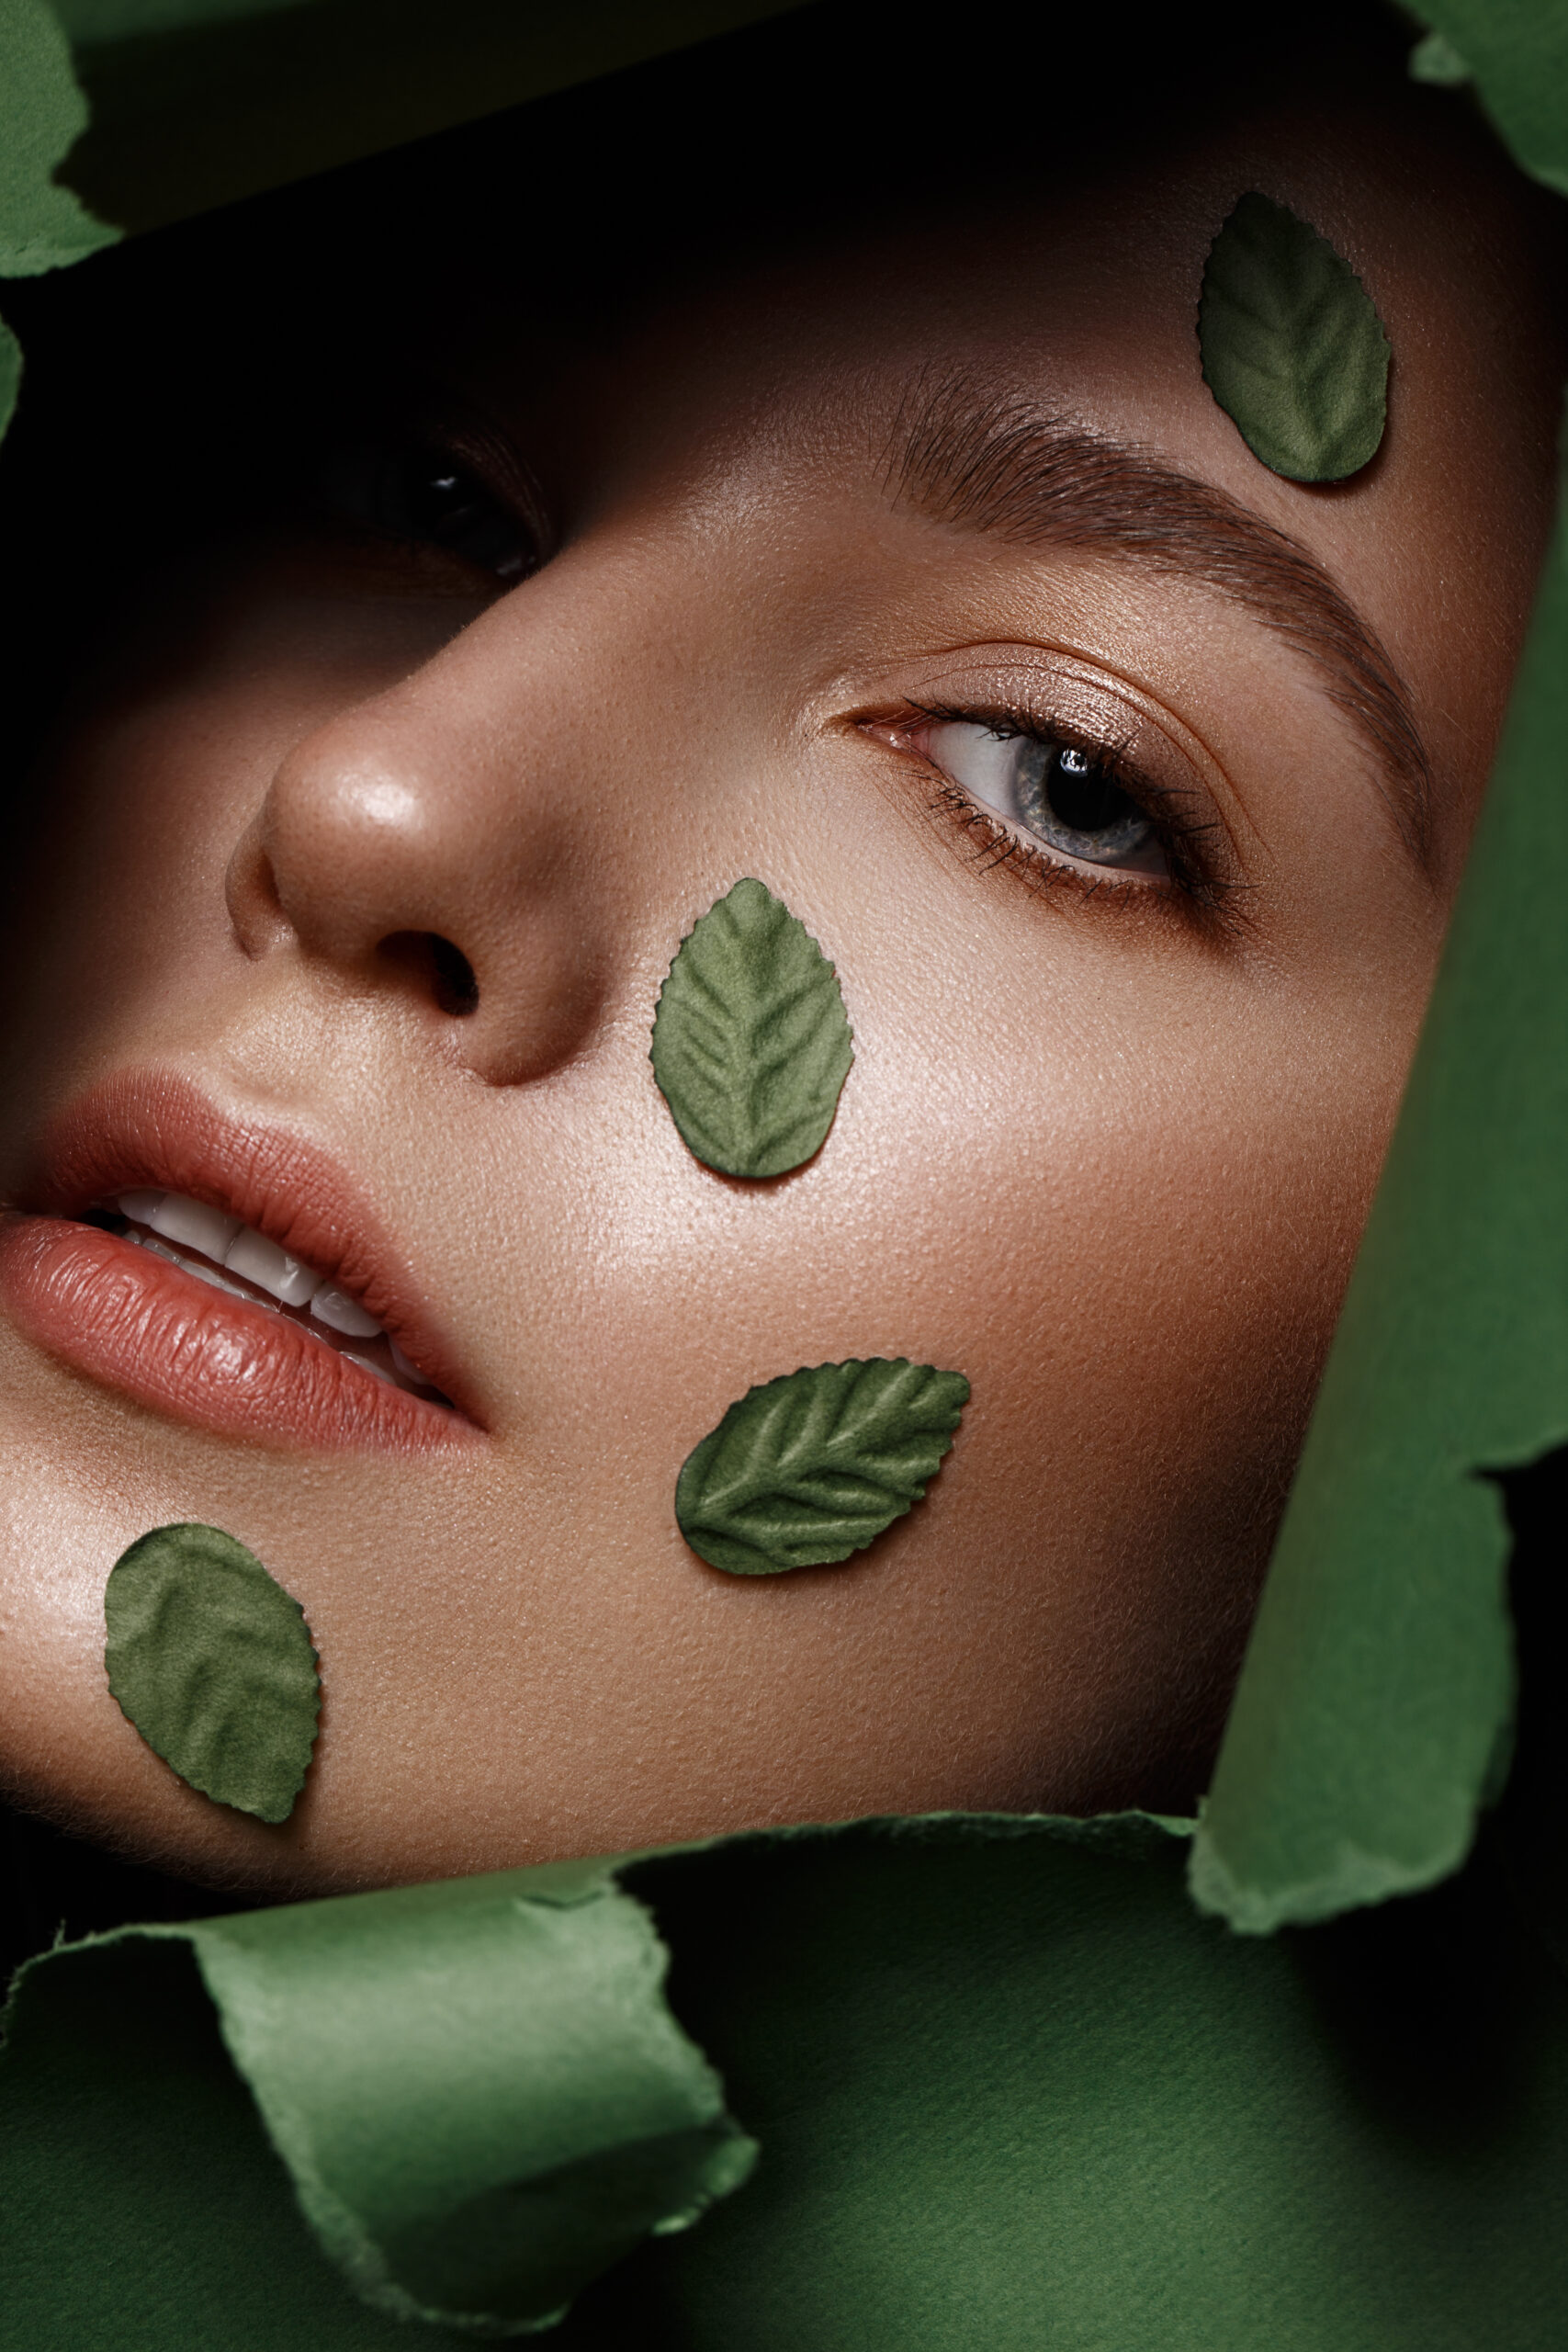 Beautiful fresh girl with perfect skin, natural make-up and green leaves. Beauty face. Photo taken in the studio.